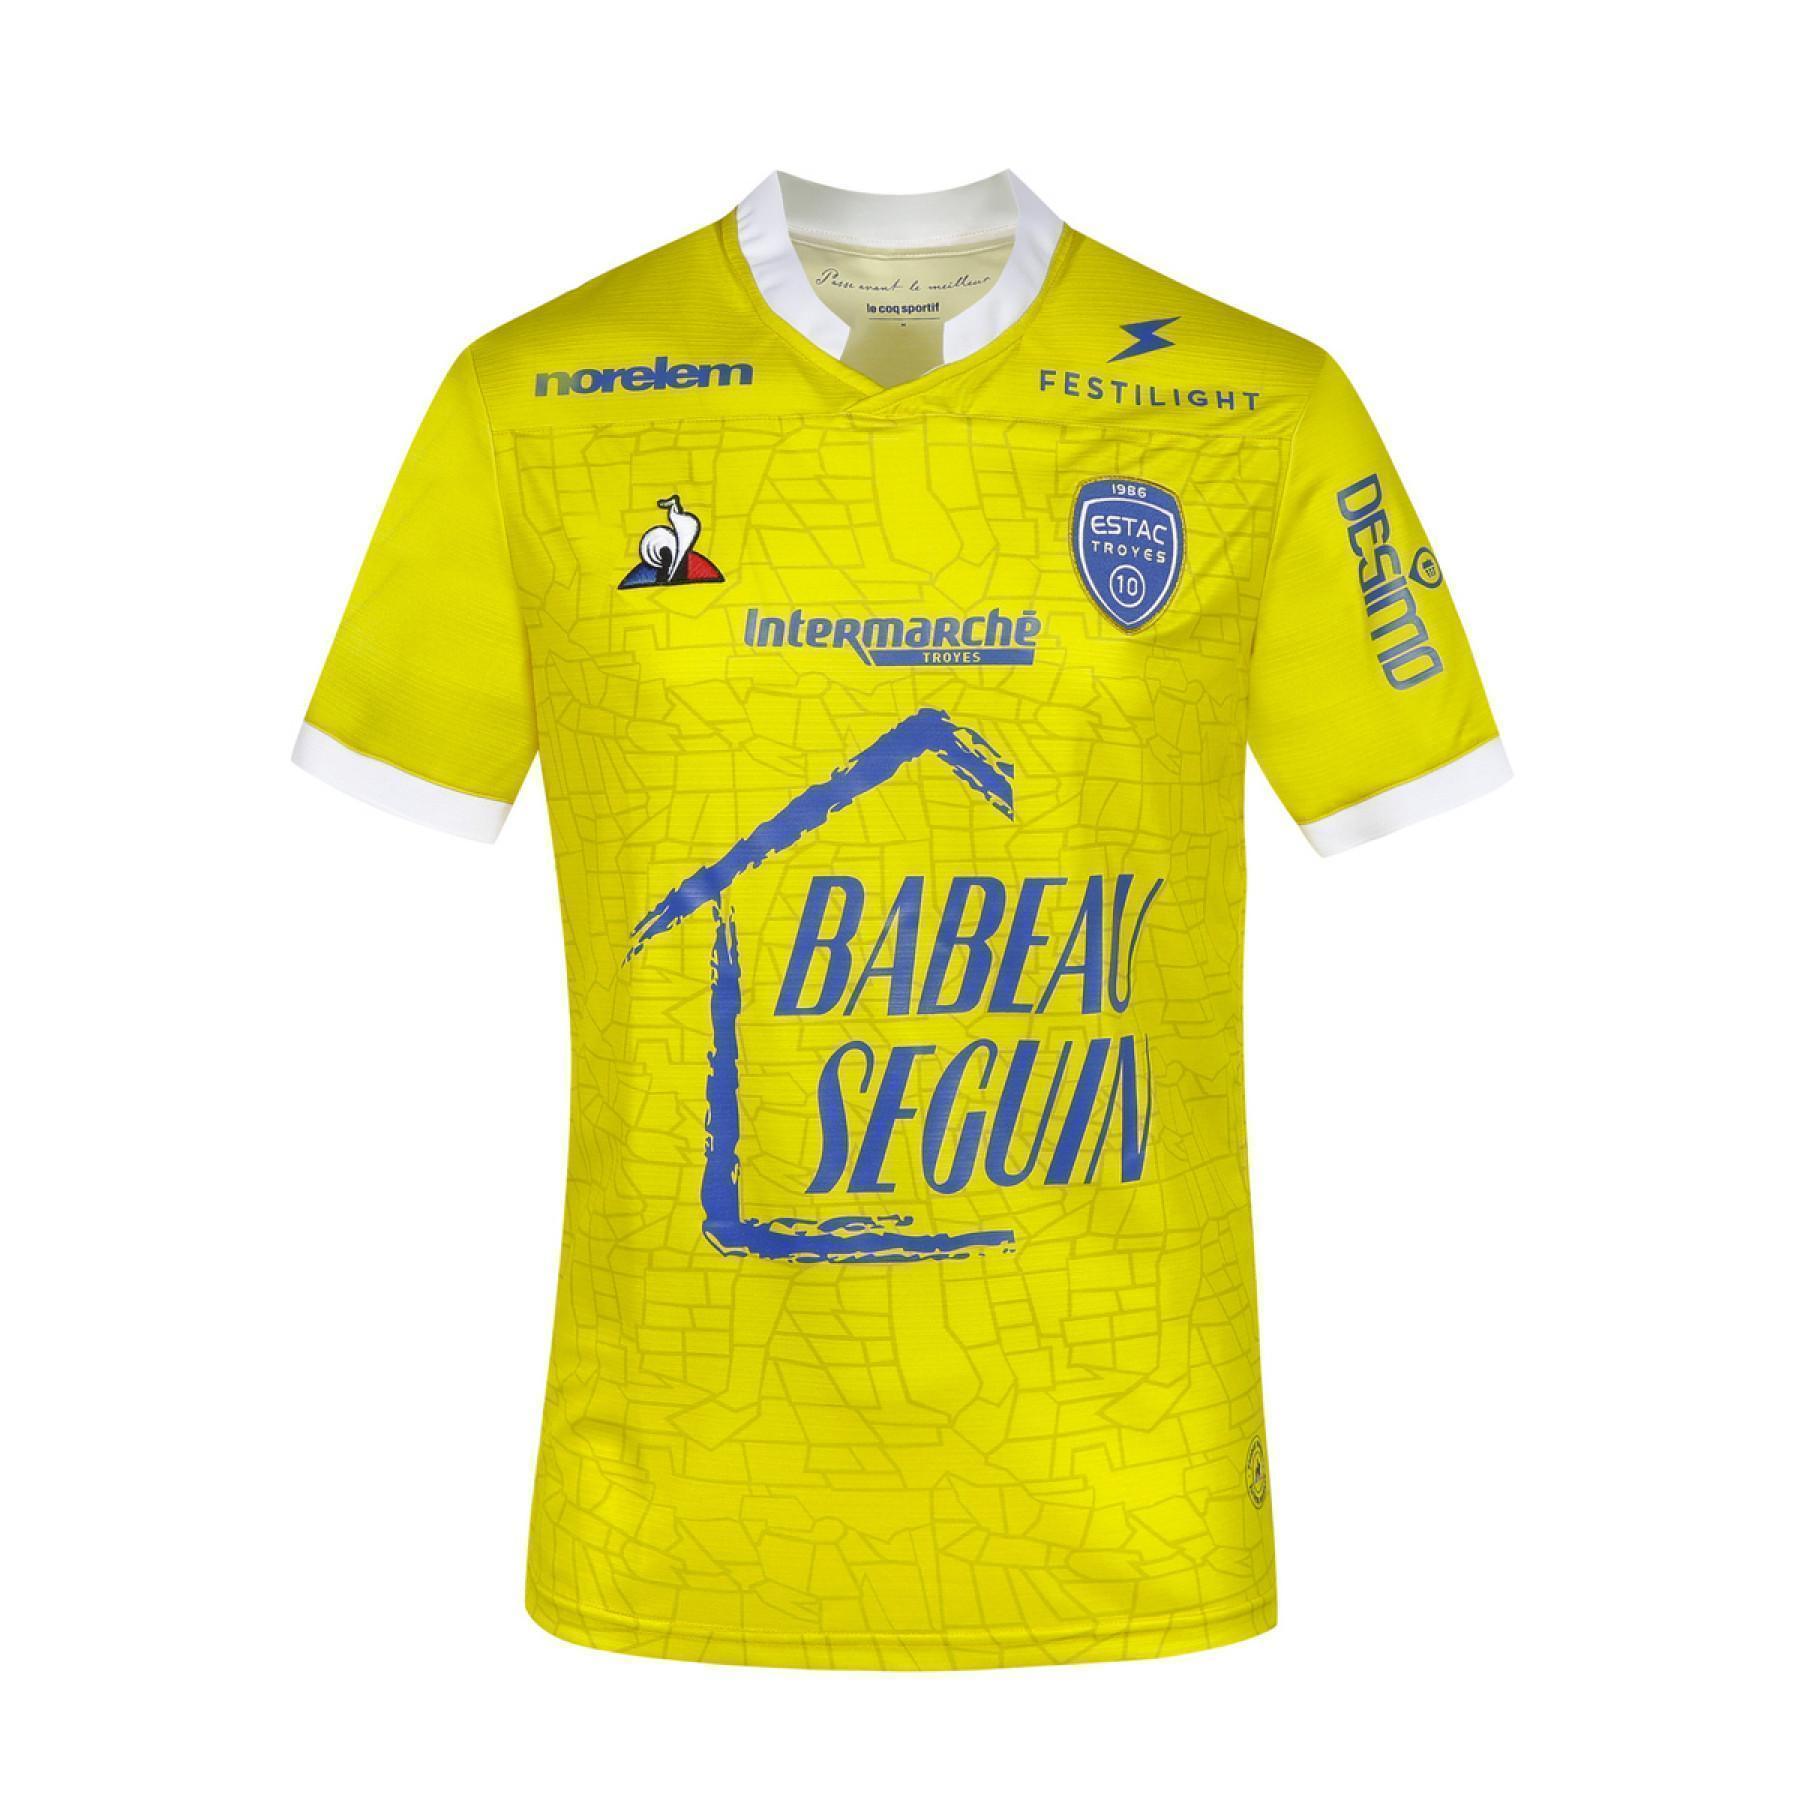 Maillot Third Estac Troyes